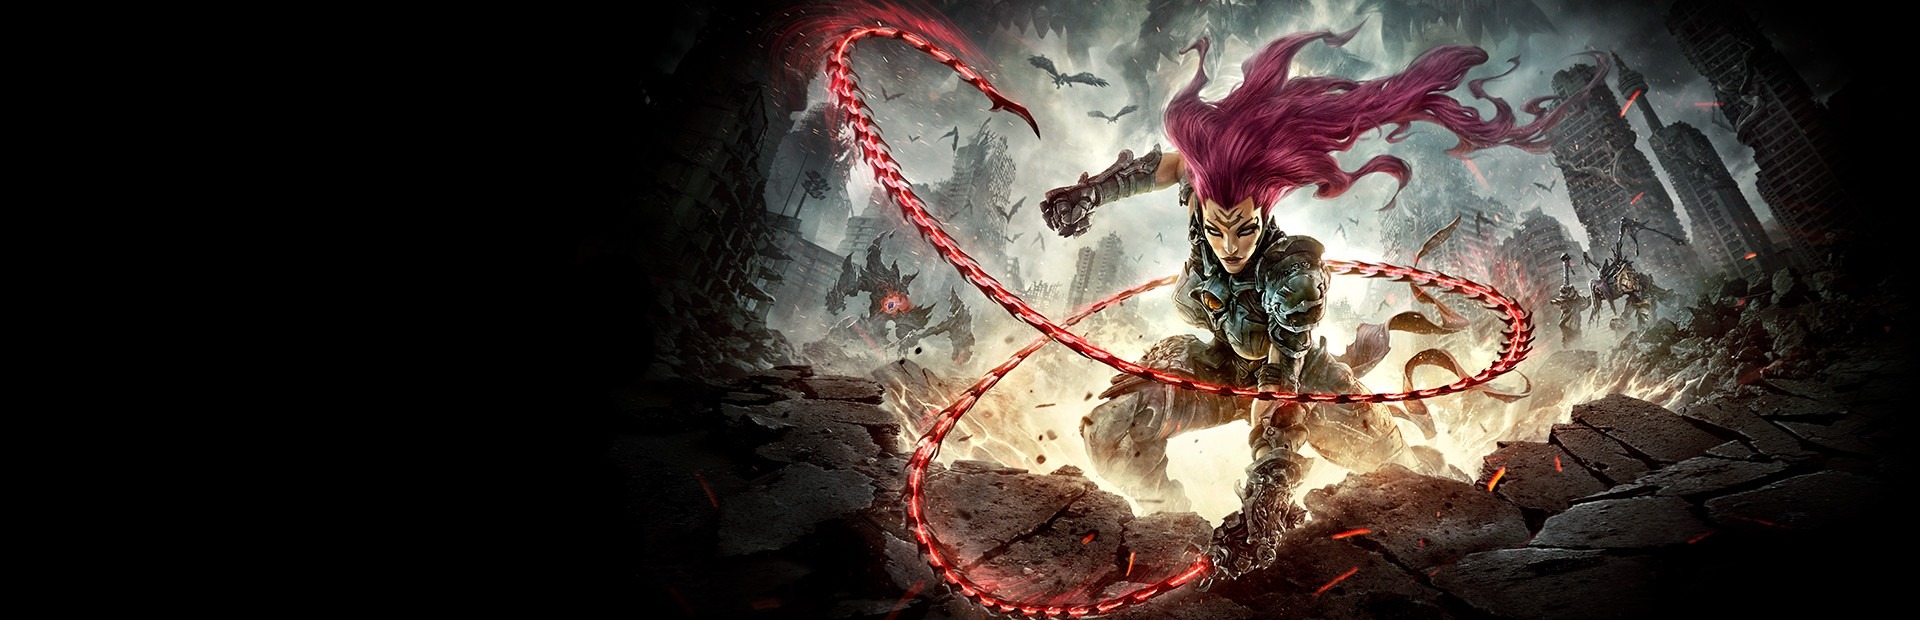 Banner Darksiders III Keepers of the Void